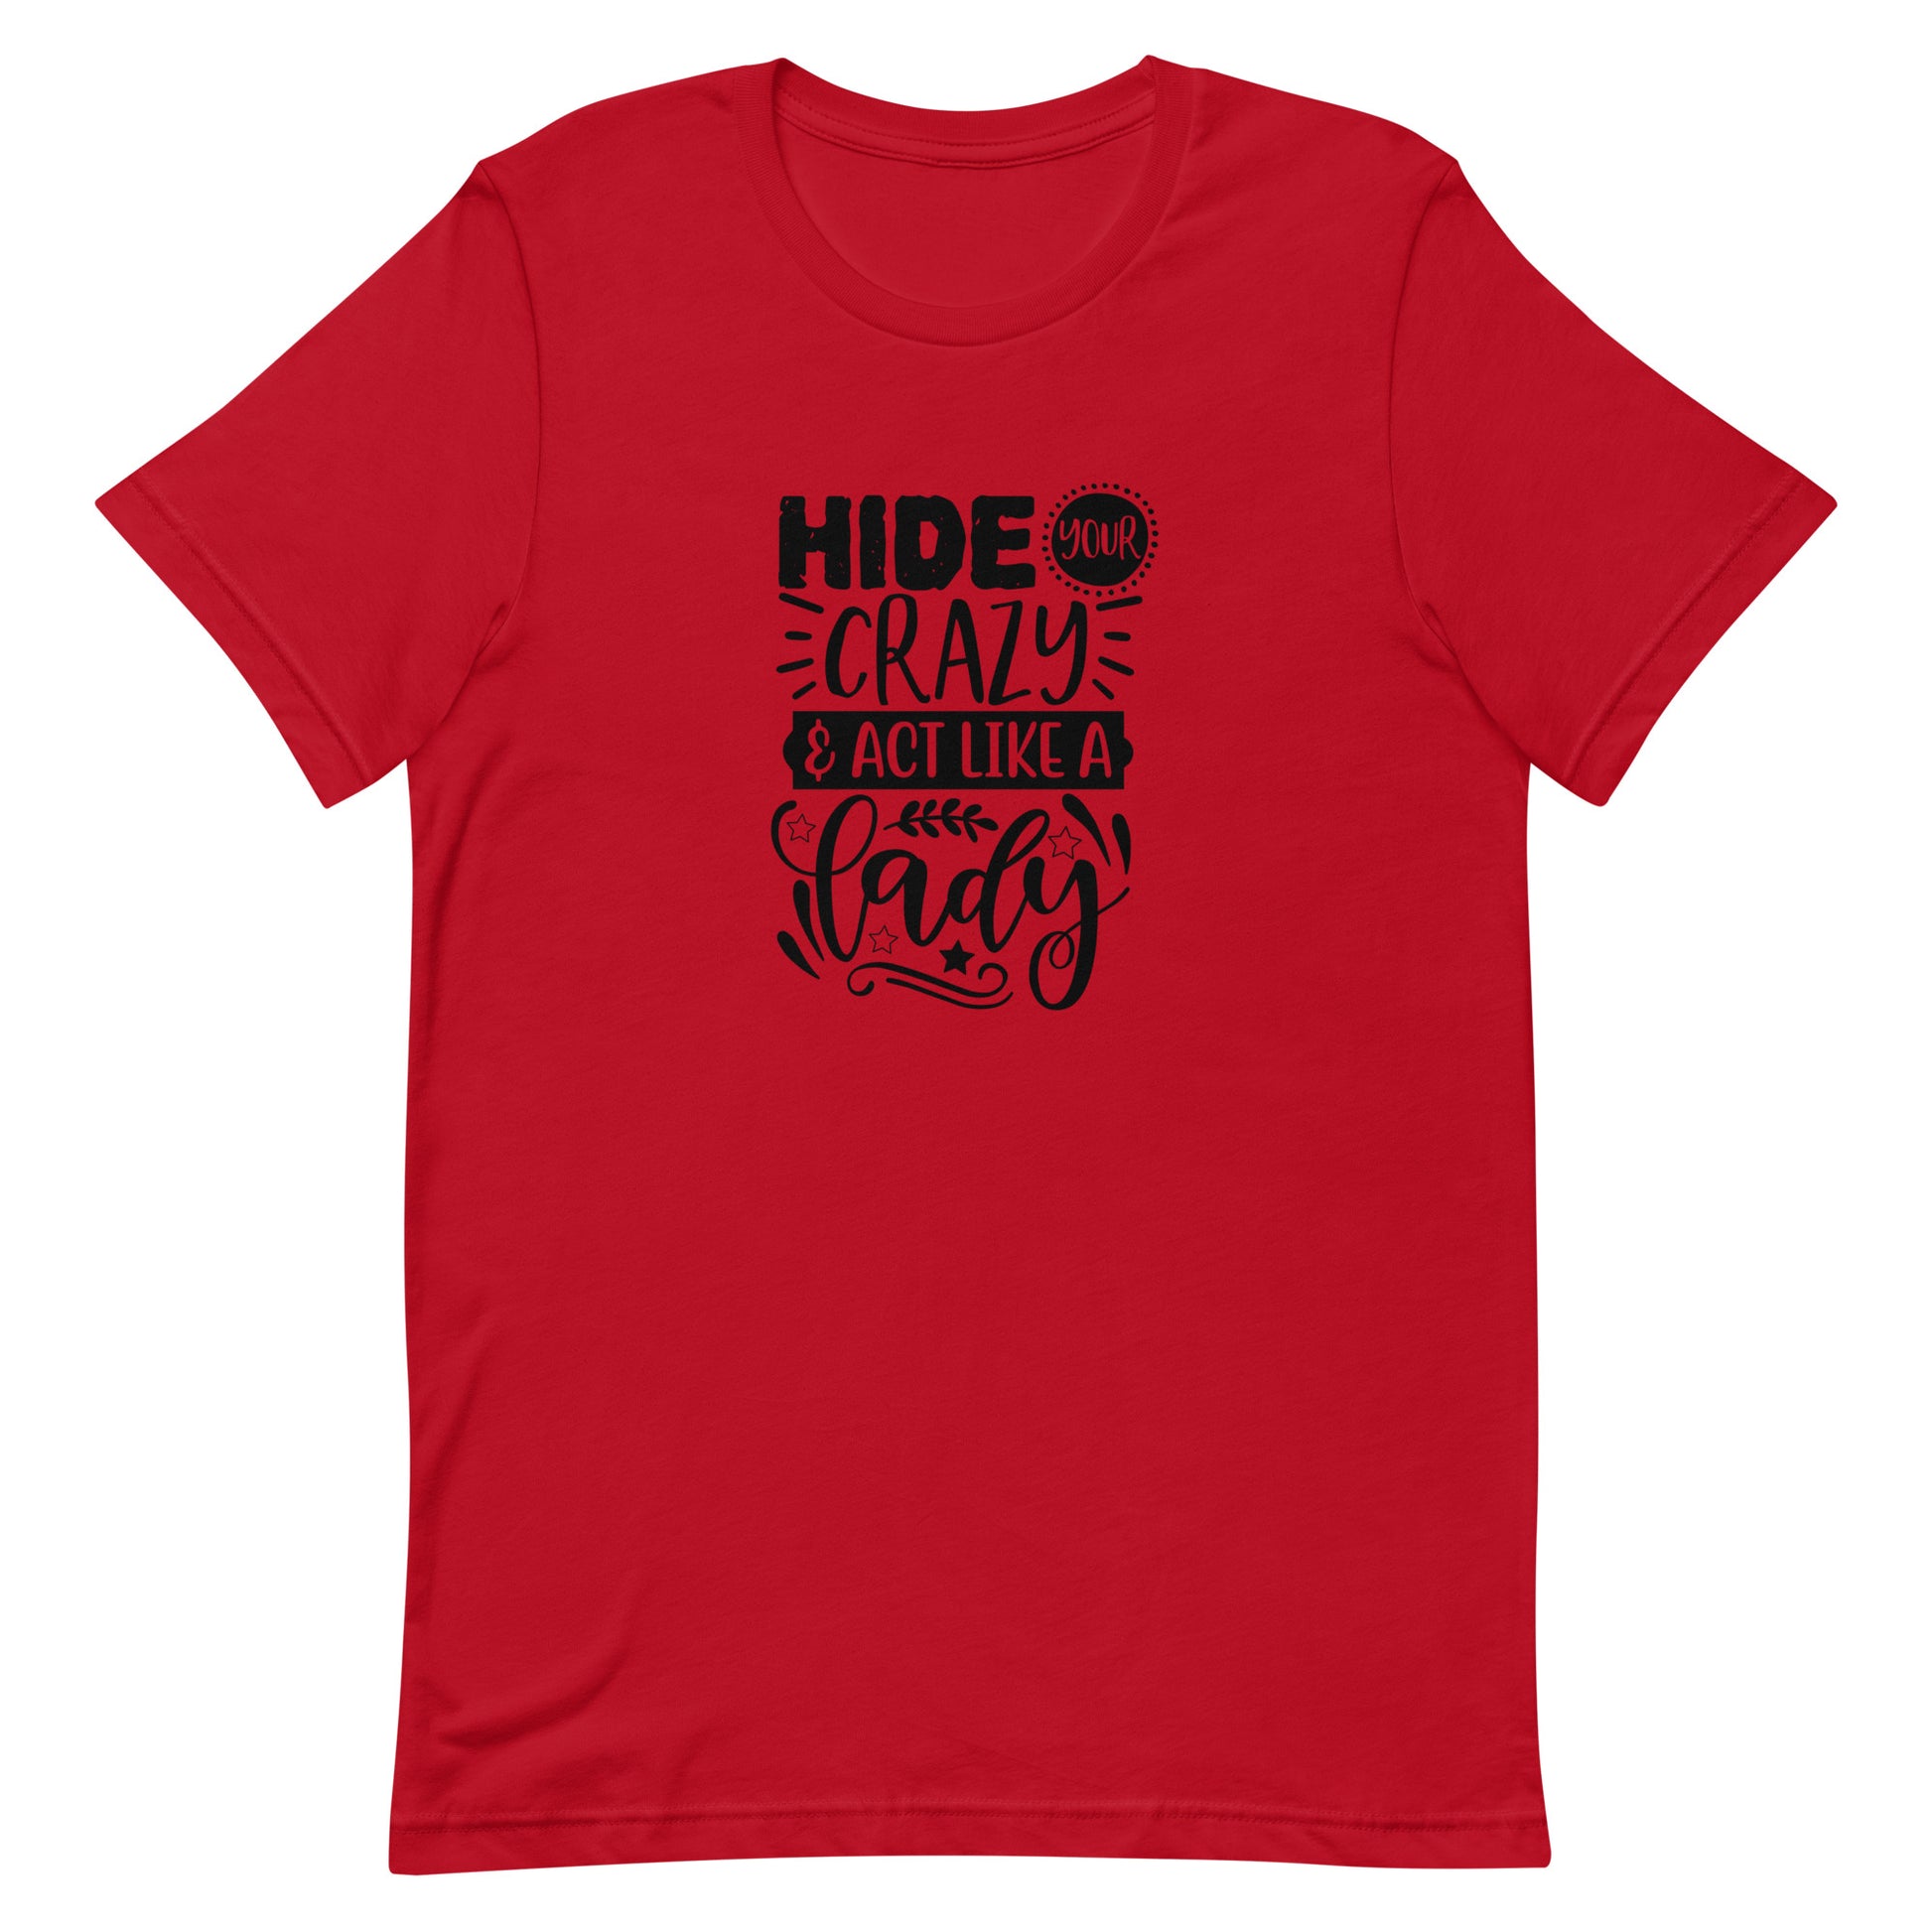 Hide Your Crazy & Act Like a Lady Unisex T-shirt